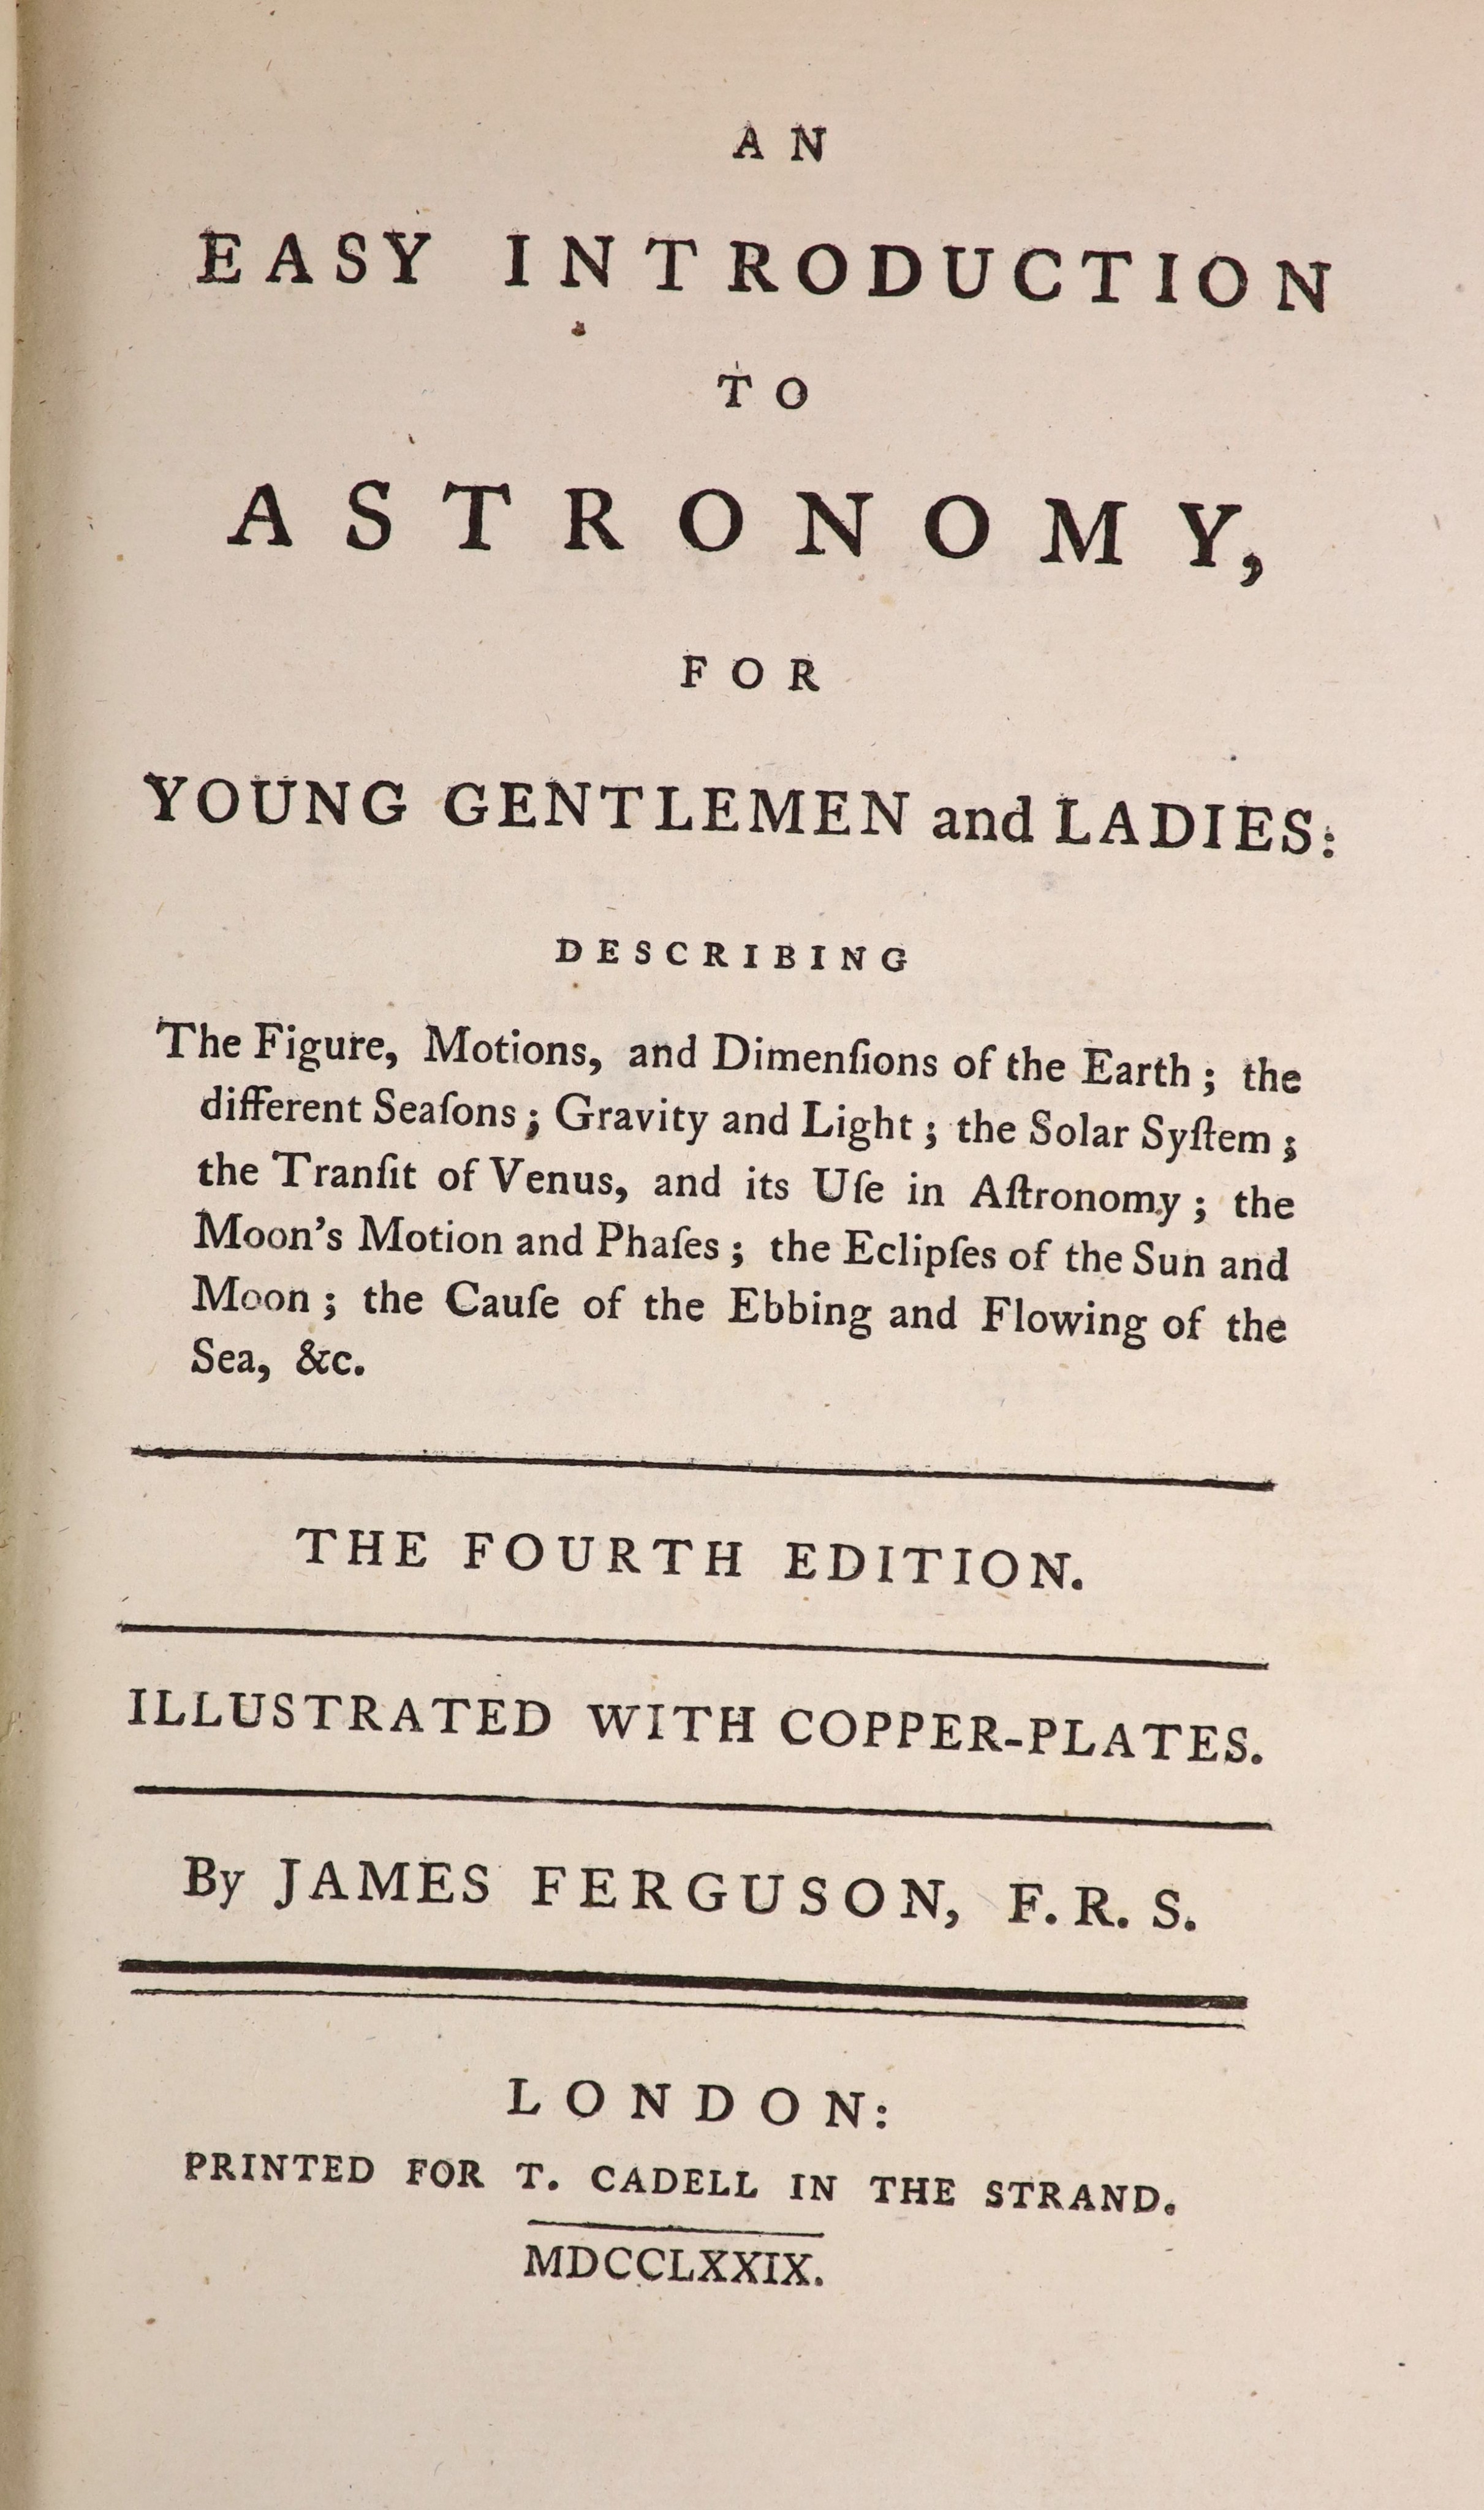 Ferguson, James - An Easy Introduction to Astronomy, for Young Gentlemen and Ladies ... 4th edition, 7 engraved and folded plates, half title; contemp. polished calf, gilt-decorated